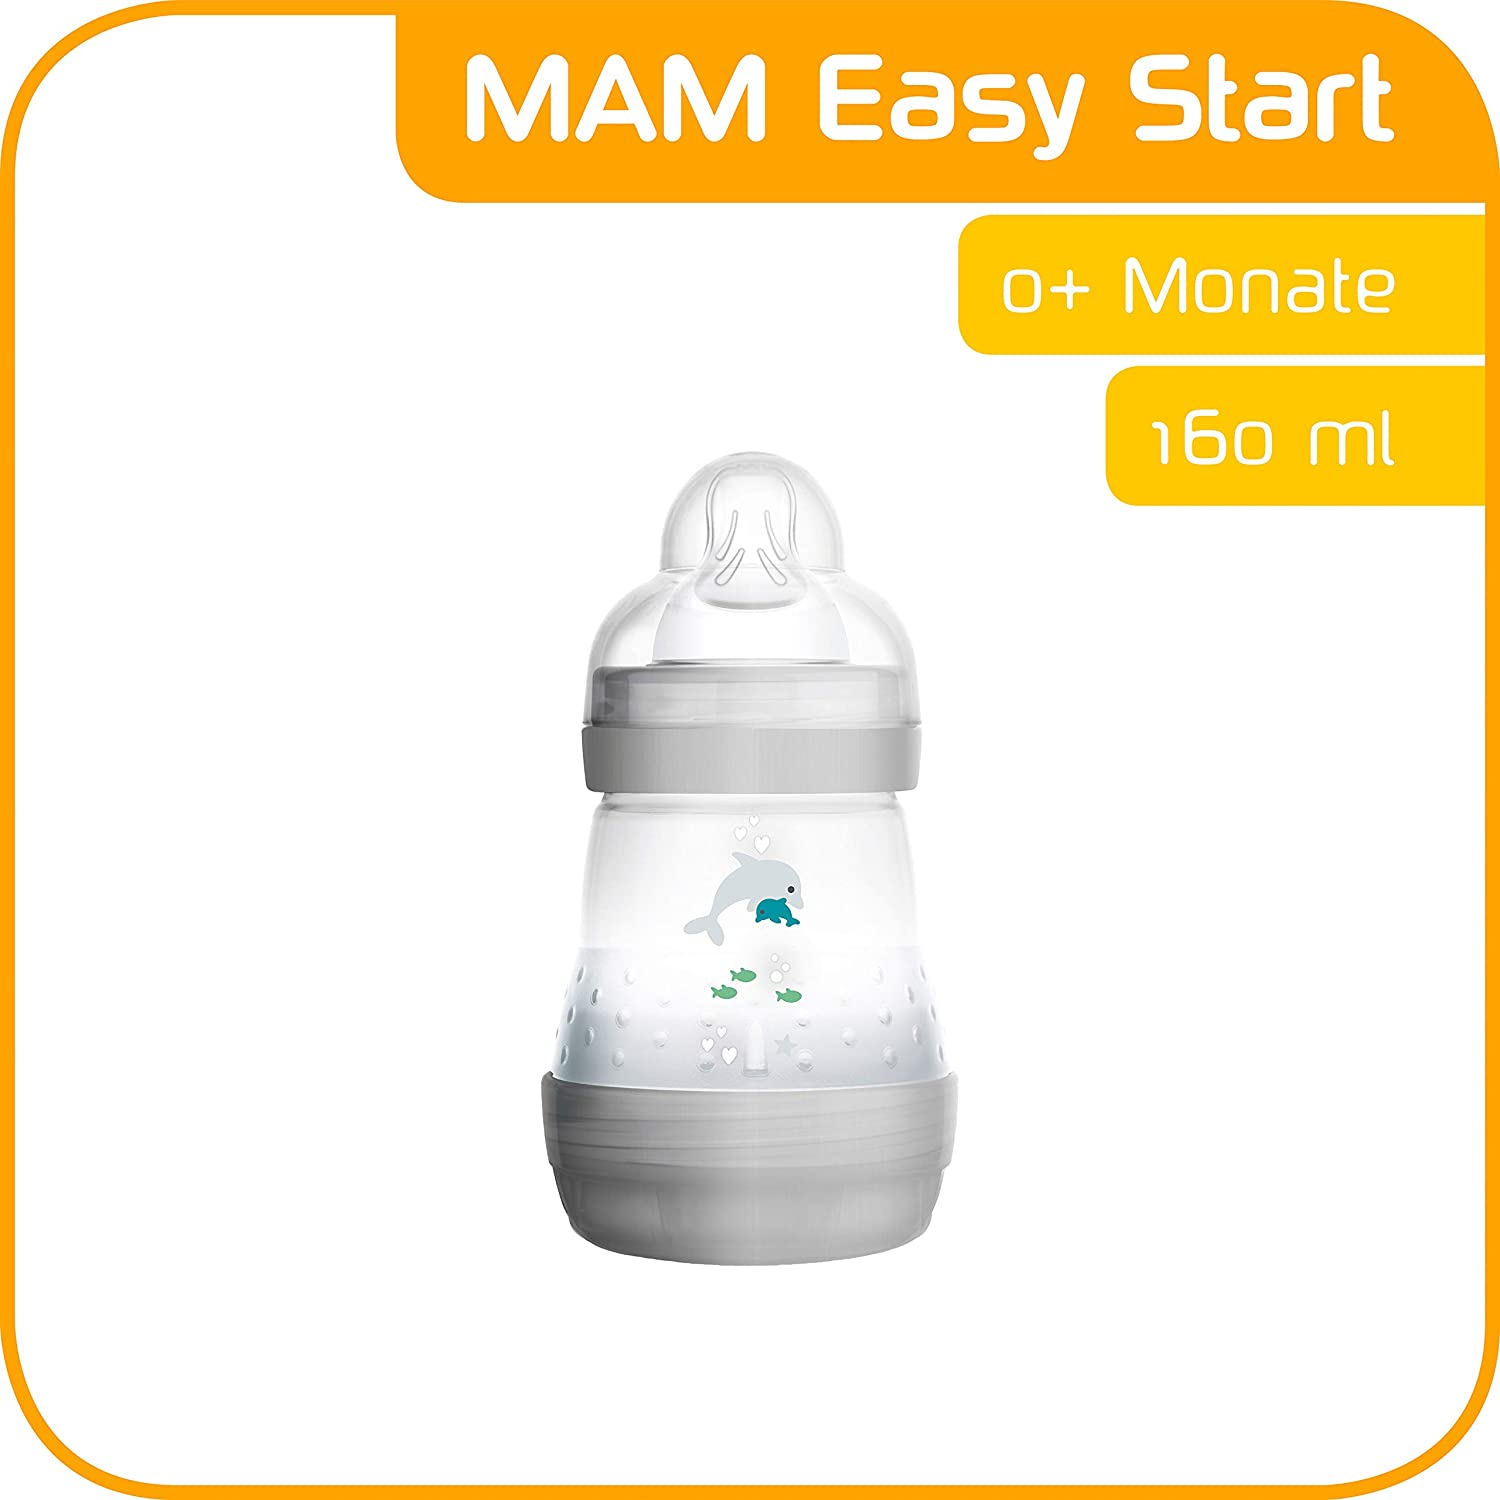 MAM Easy Start anti-colic baby bottle (160 ml), milk bottle with innovative base valve to prevent colic, baby’s drinking bottle with size 1 teat, from birth, dolphin, grey